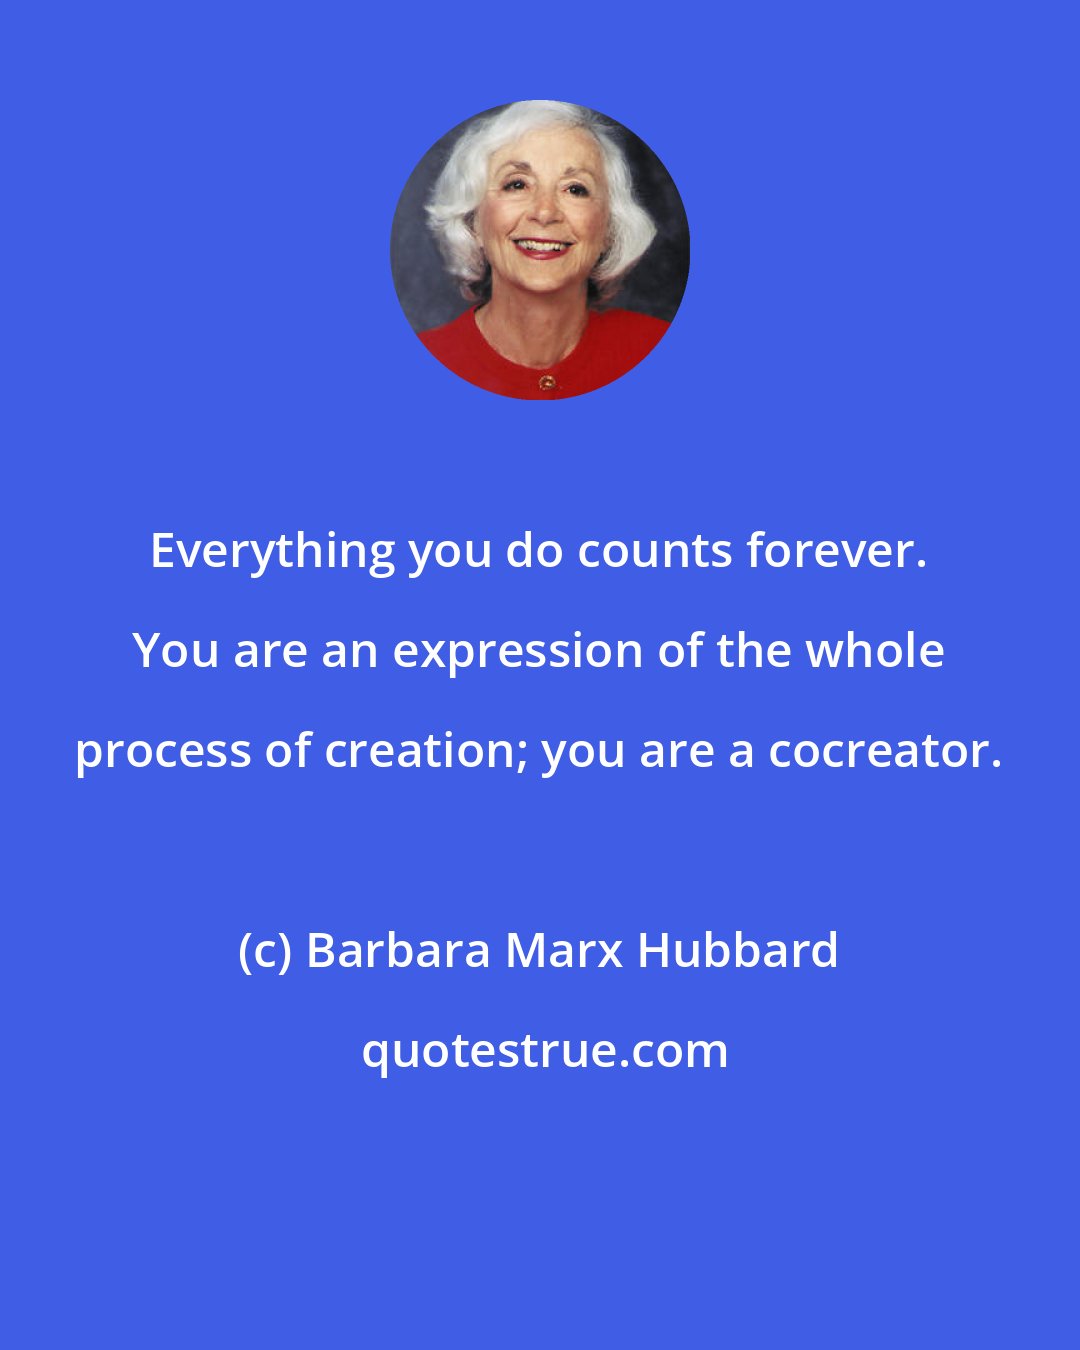 Barbara Marx Hubbard: Everything you do counts forever. You are an expression of the whole process of creation; you are a cocreator.